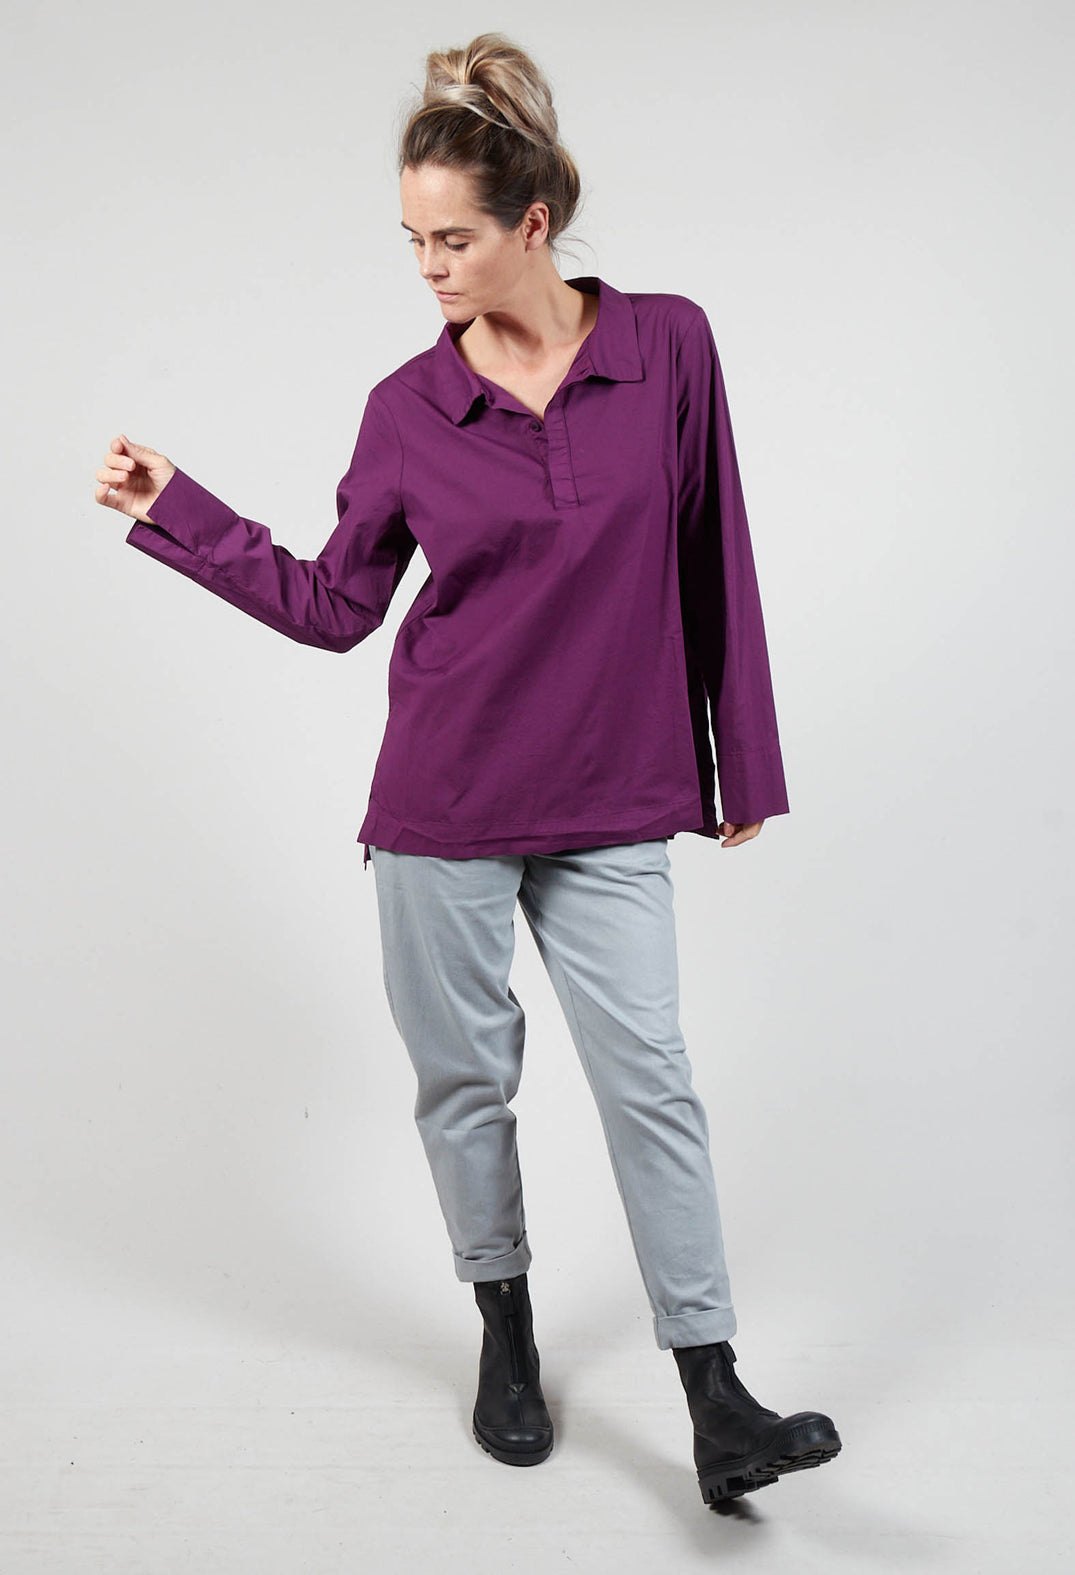 Tica Blouse in Violet